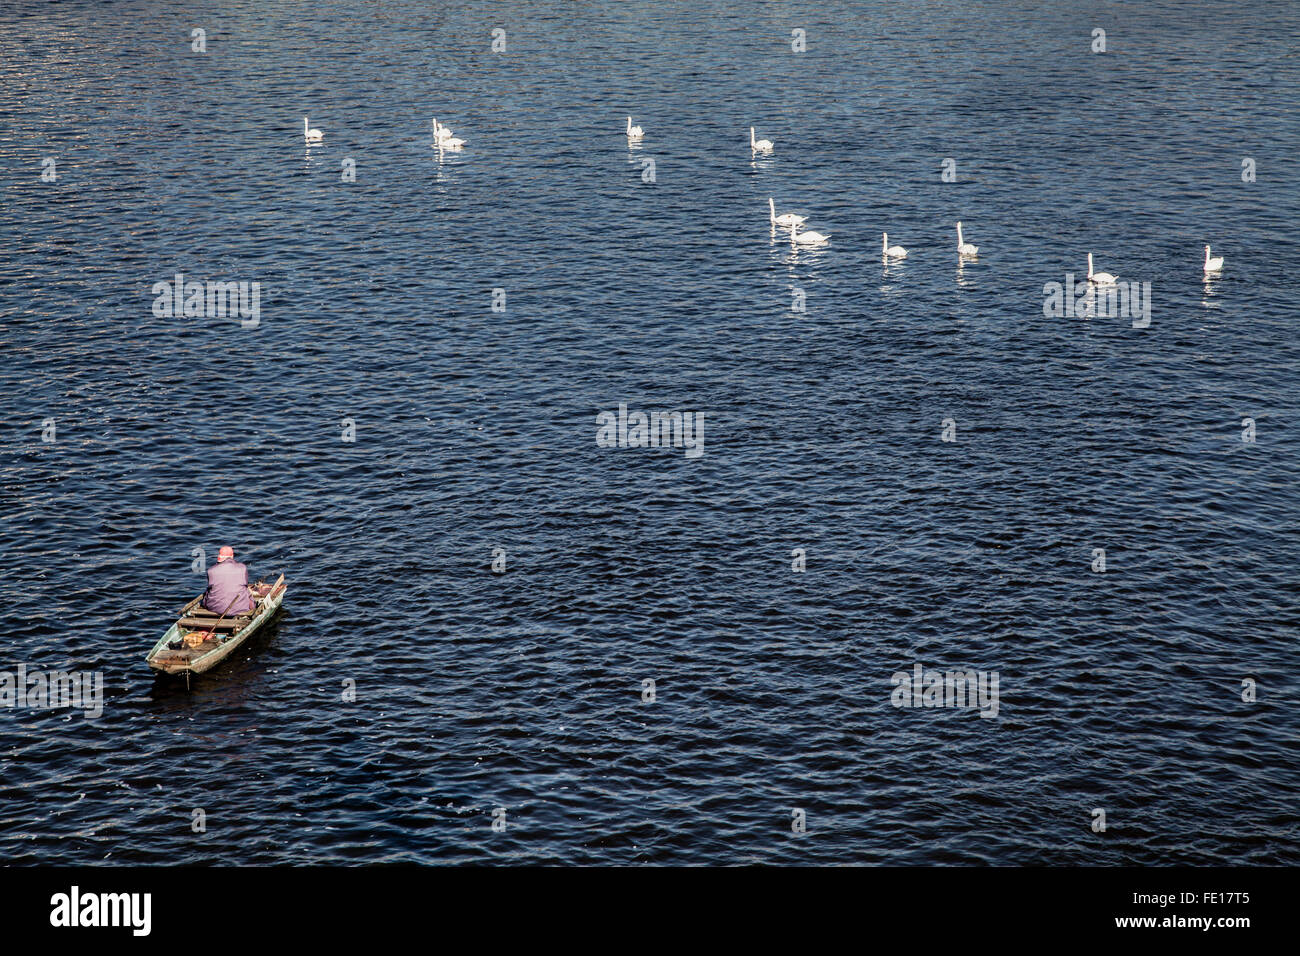 Man rowing in a boat, white geese swimming by, a tranquil scene on the Vltava River in Prague Czech Republic Stock Photo